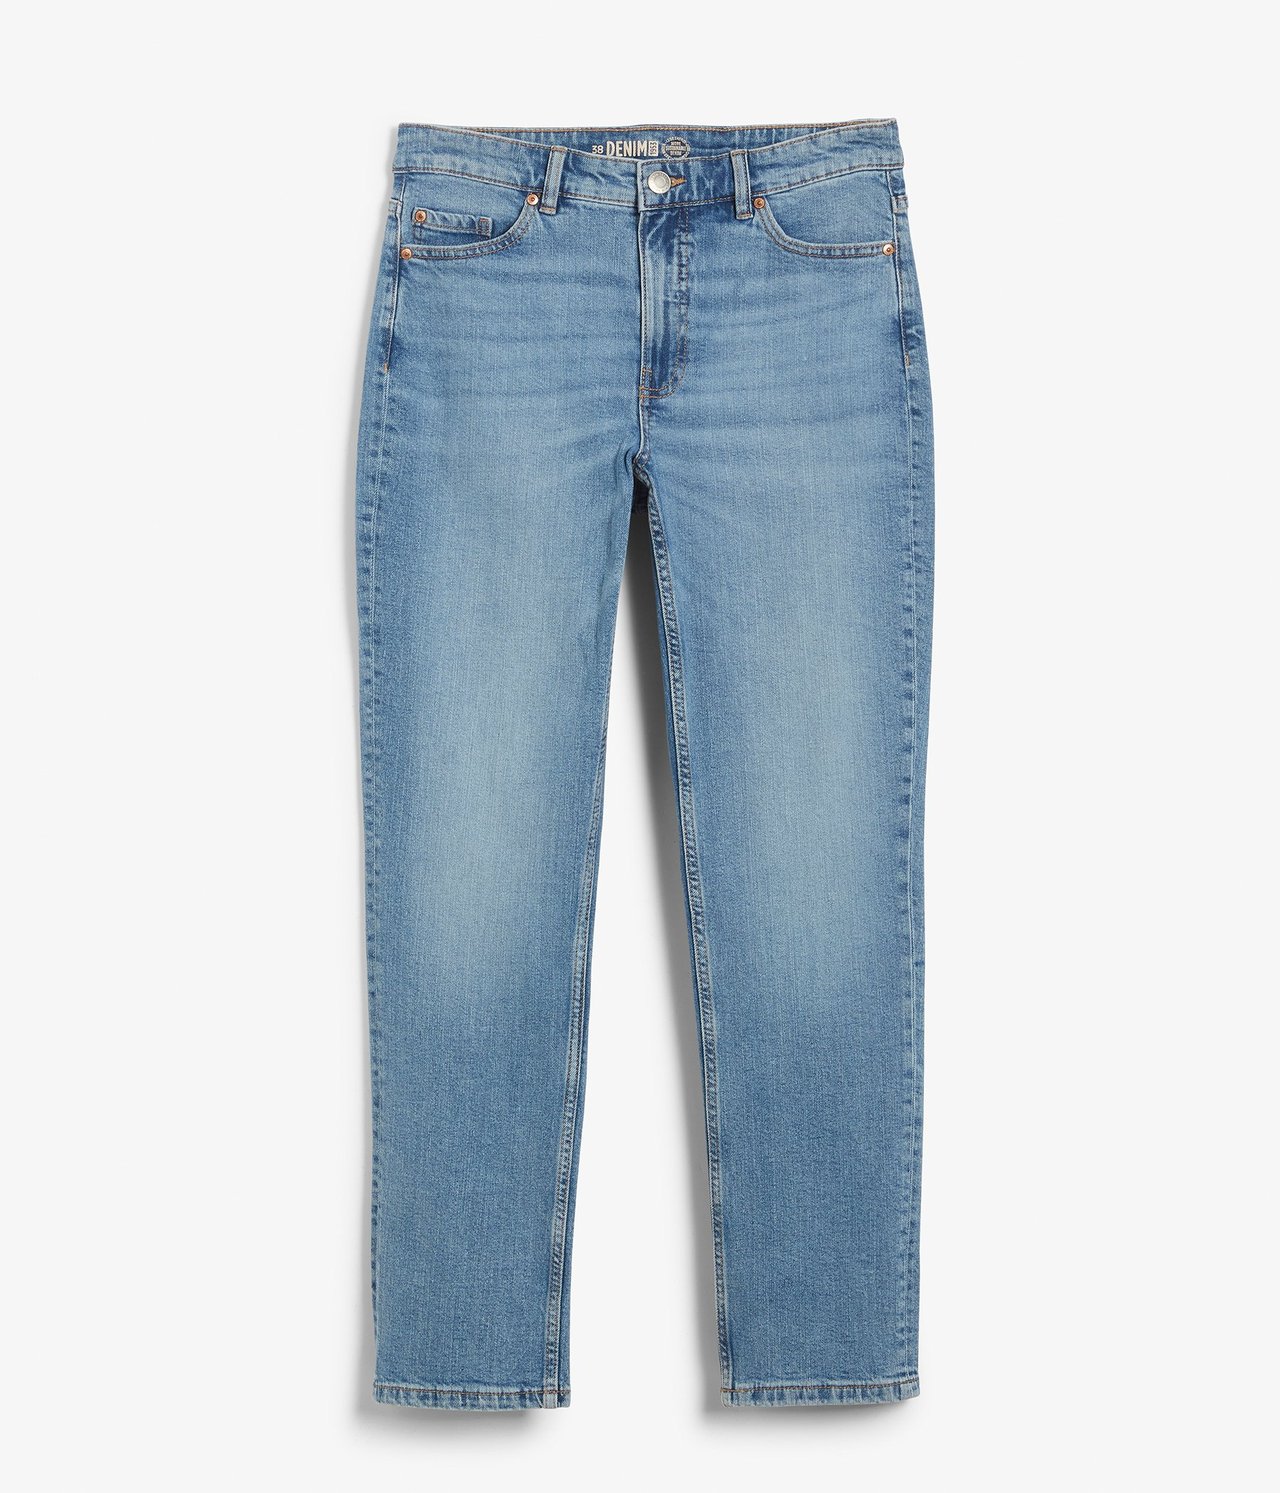 Jeans high waist tapered